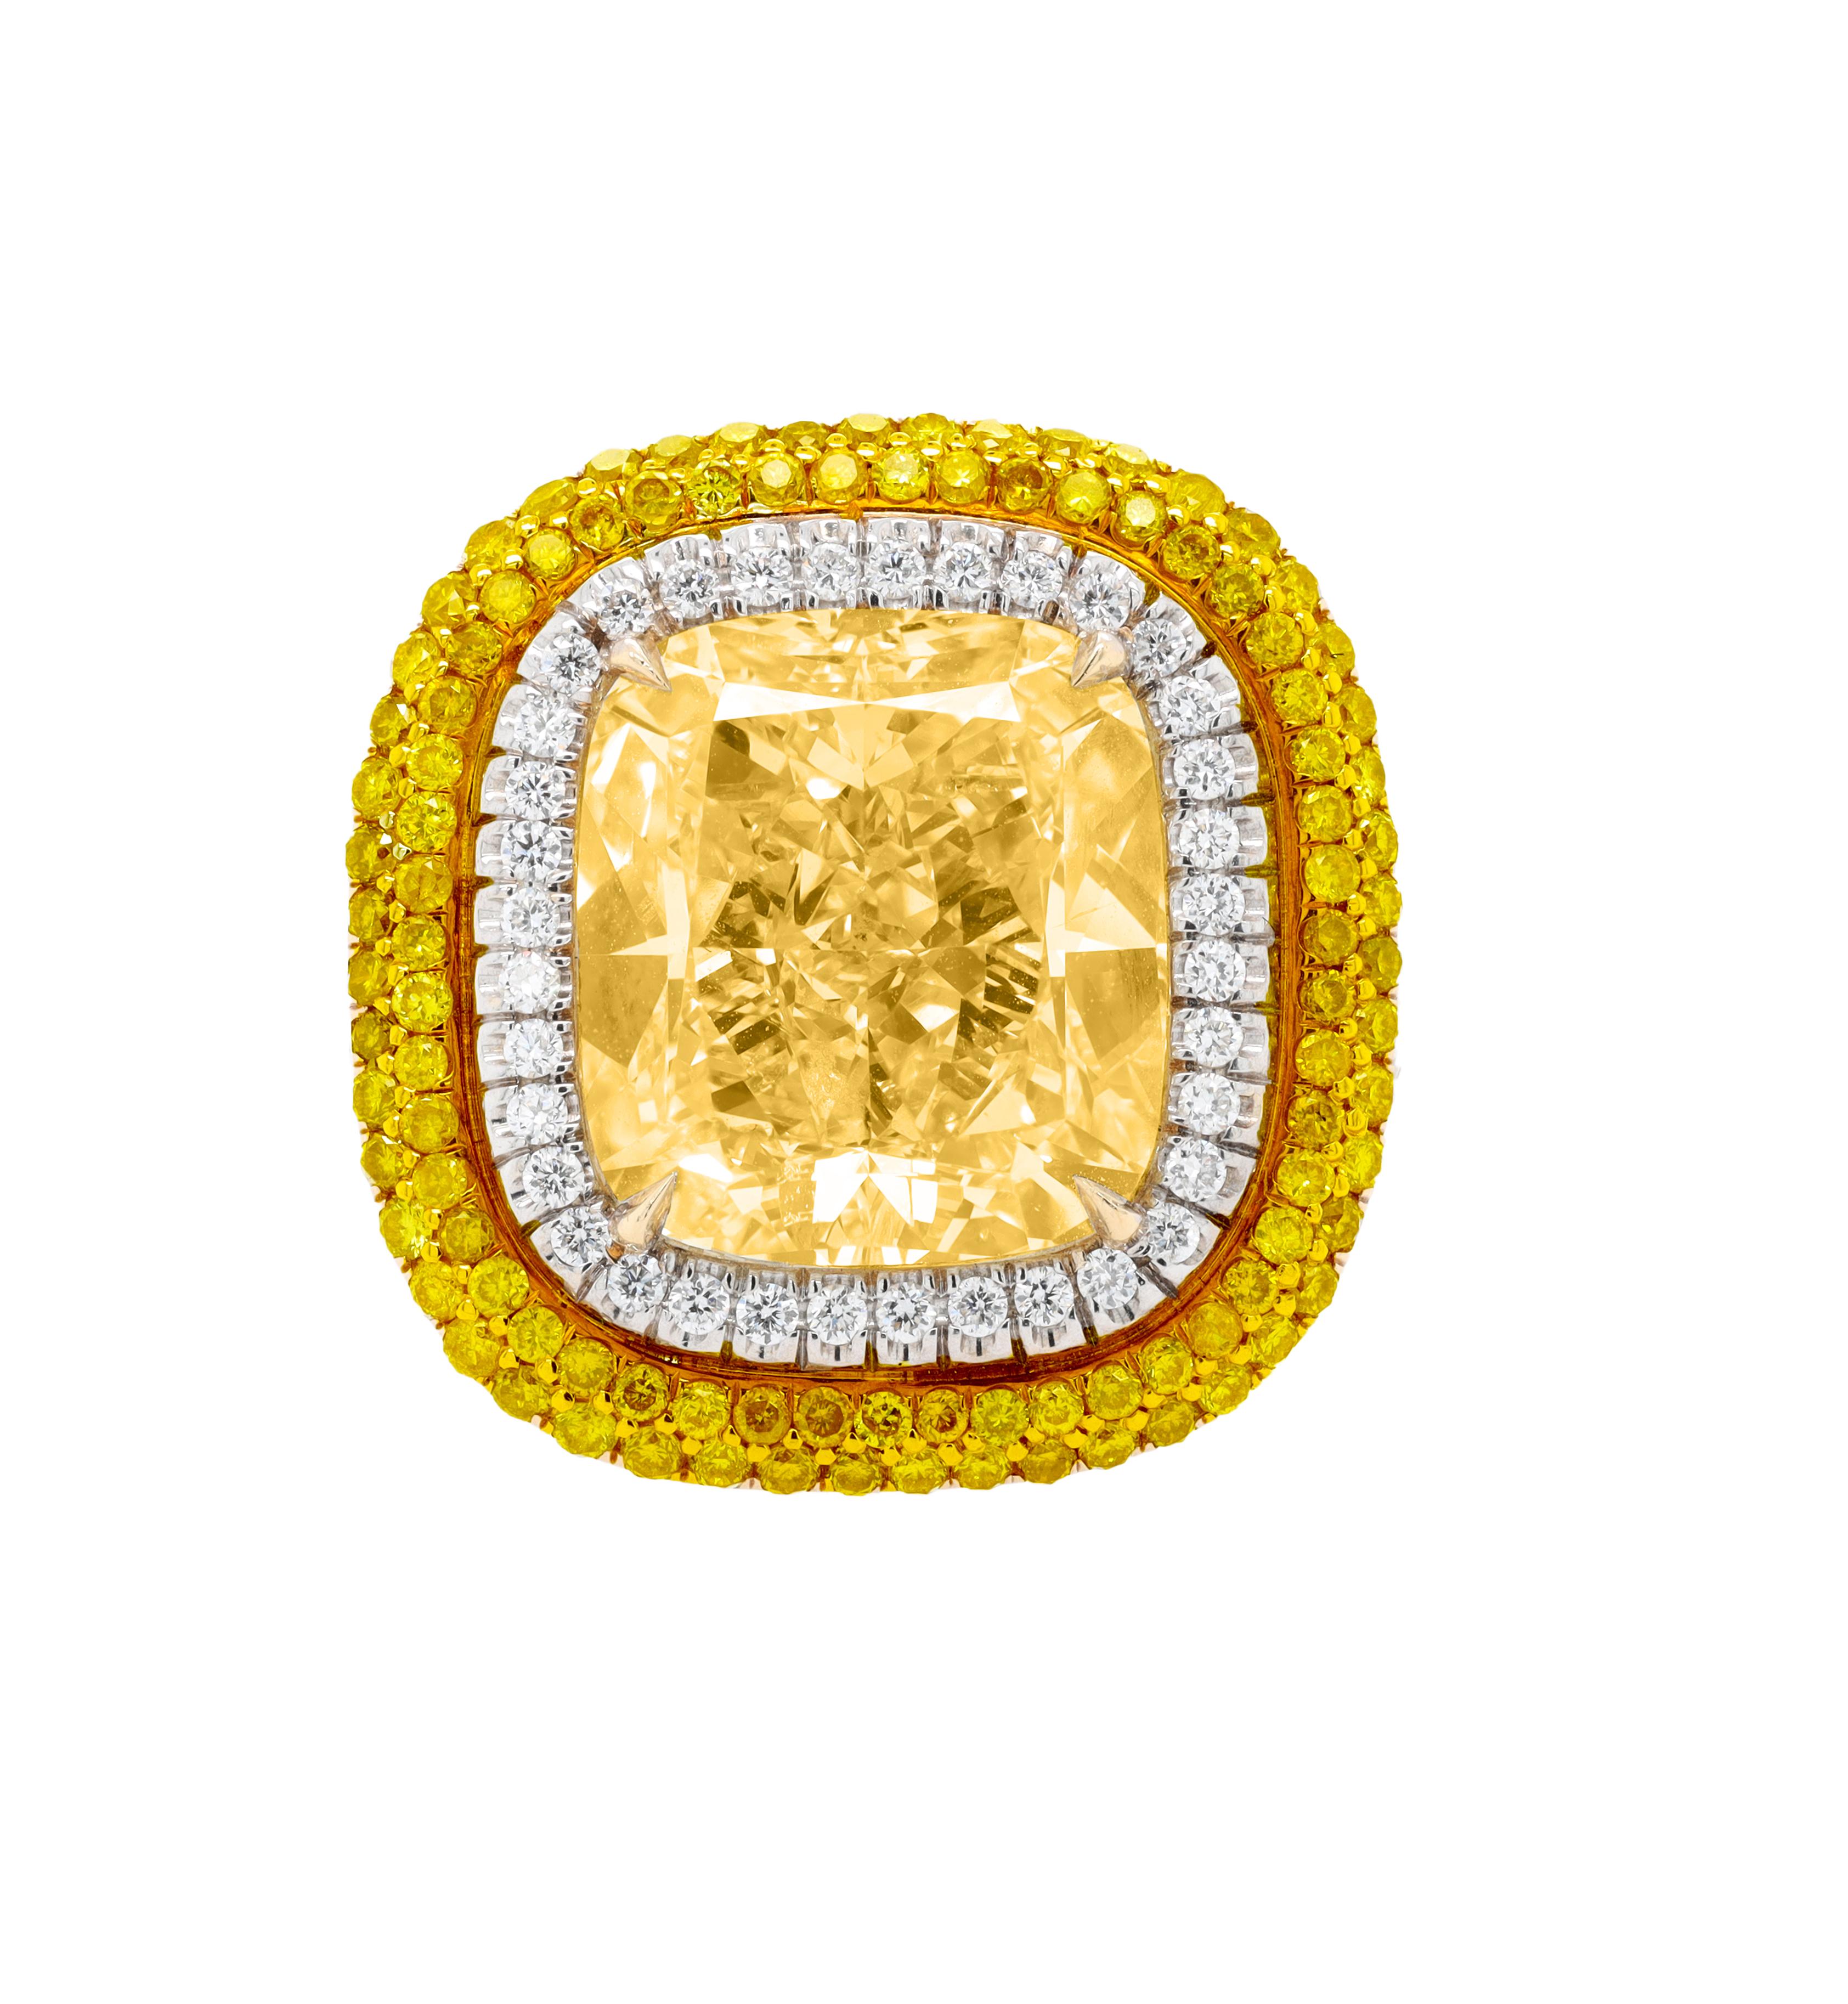 Platinum and 18kt yellow gold diamond engagement ring with GIA certified fancy yellow center cushion cut diamond 8.56 fysi1 (radc901) set in double halo setting with 1.51ct of micropave yellow and white round diamonds.
